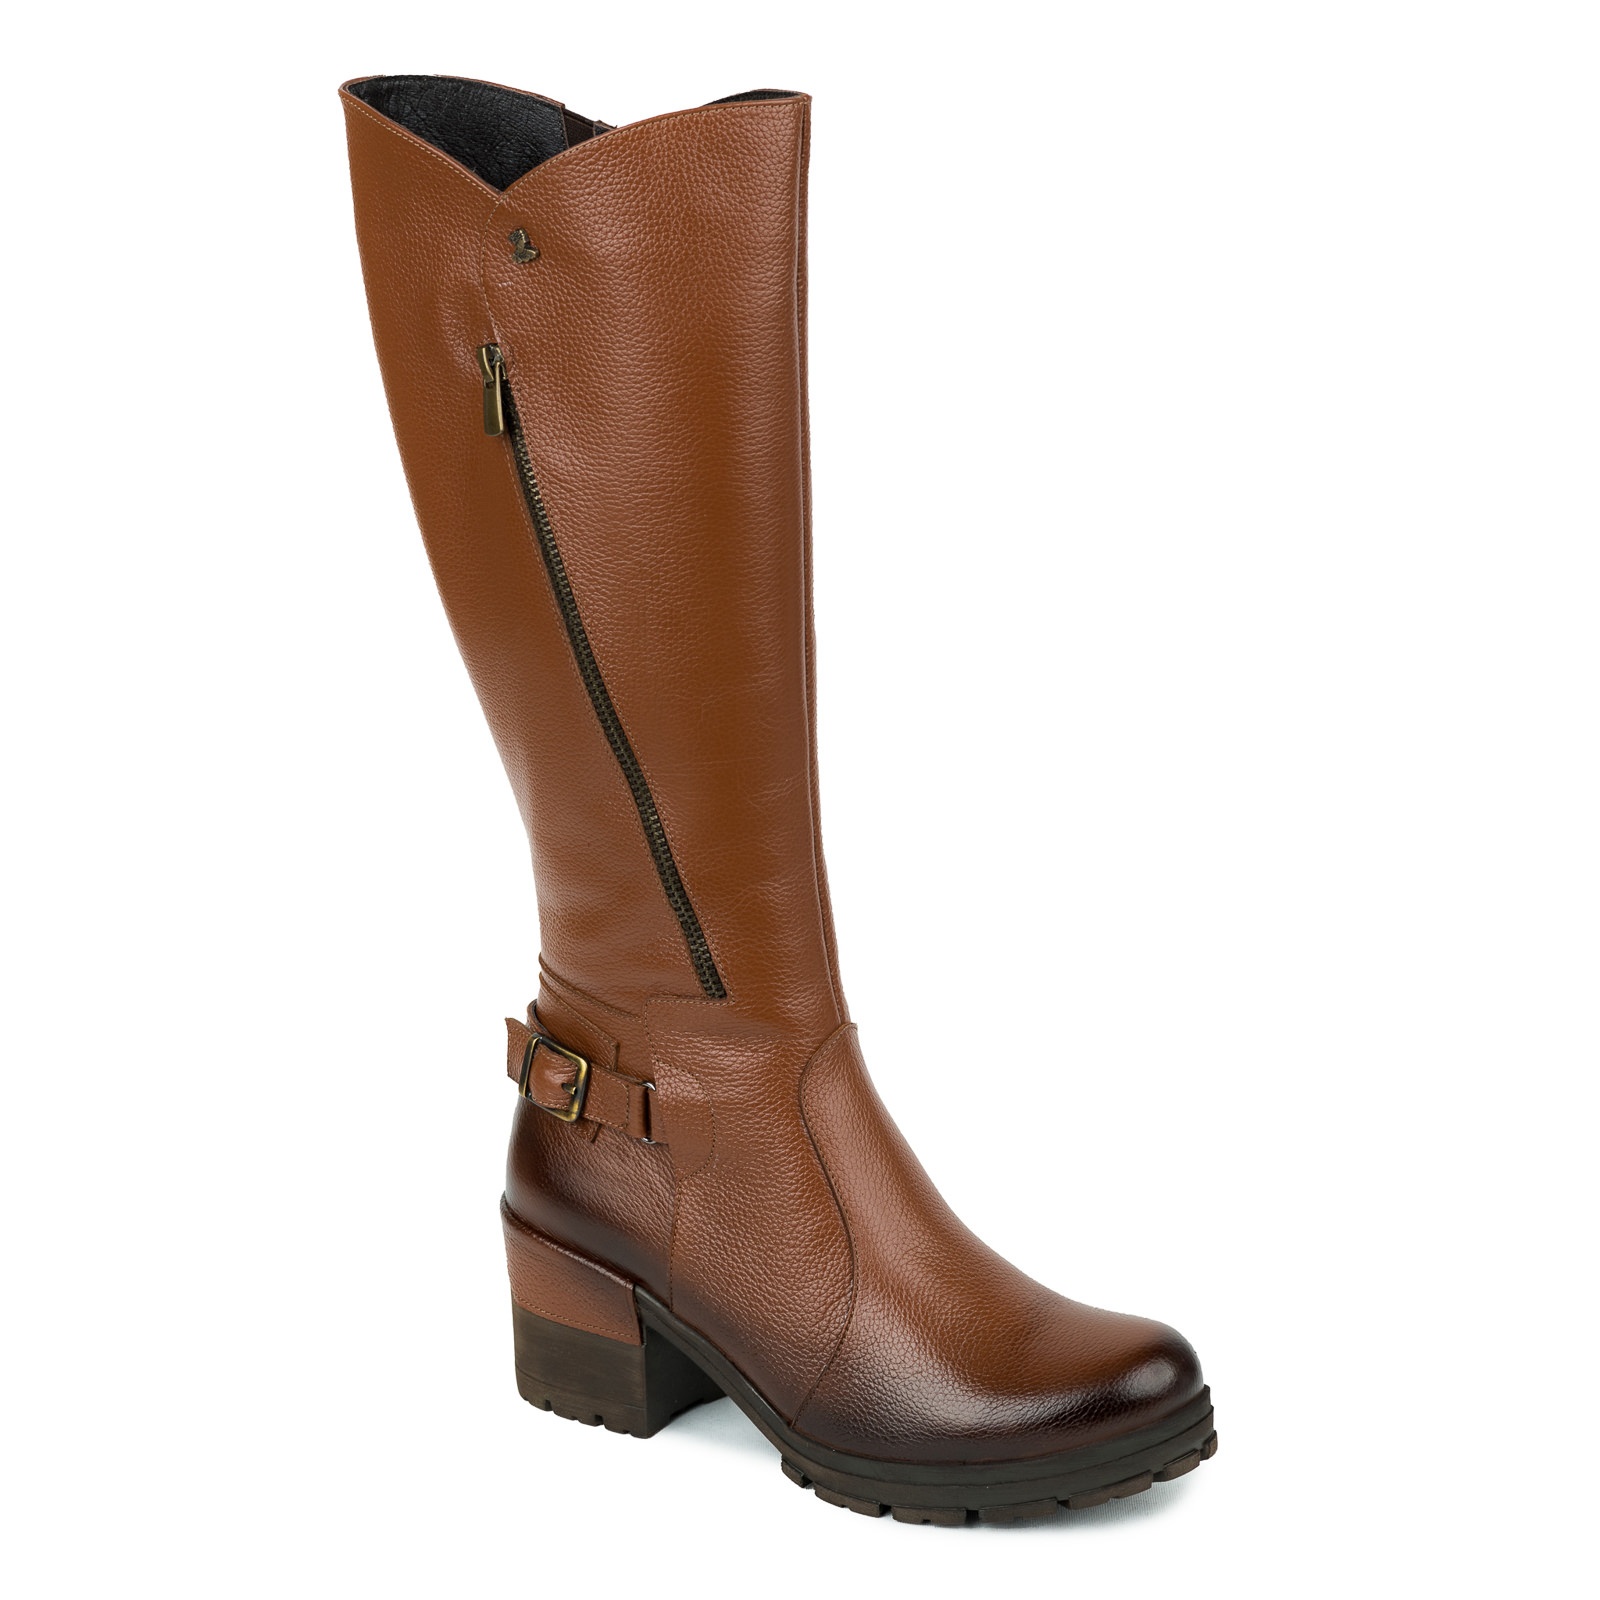 Leather boots B636 - CAMEL